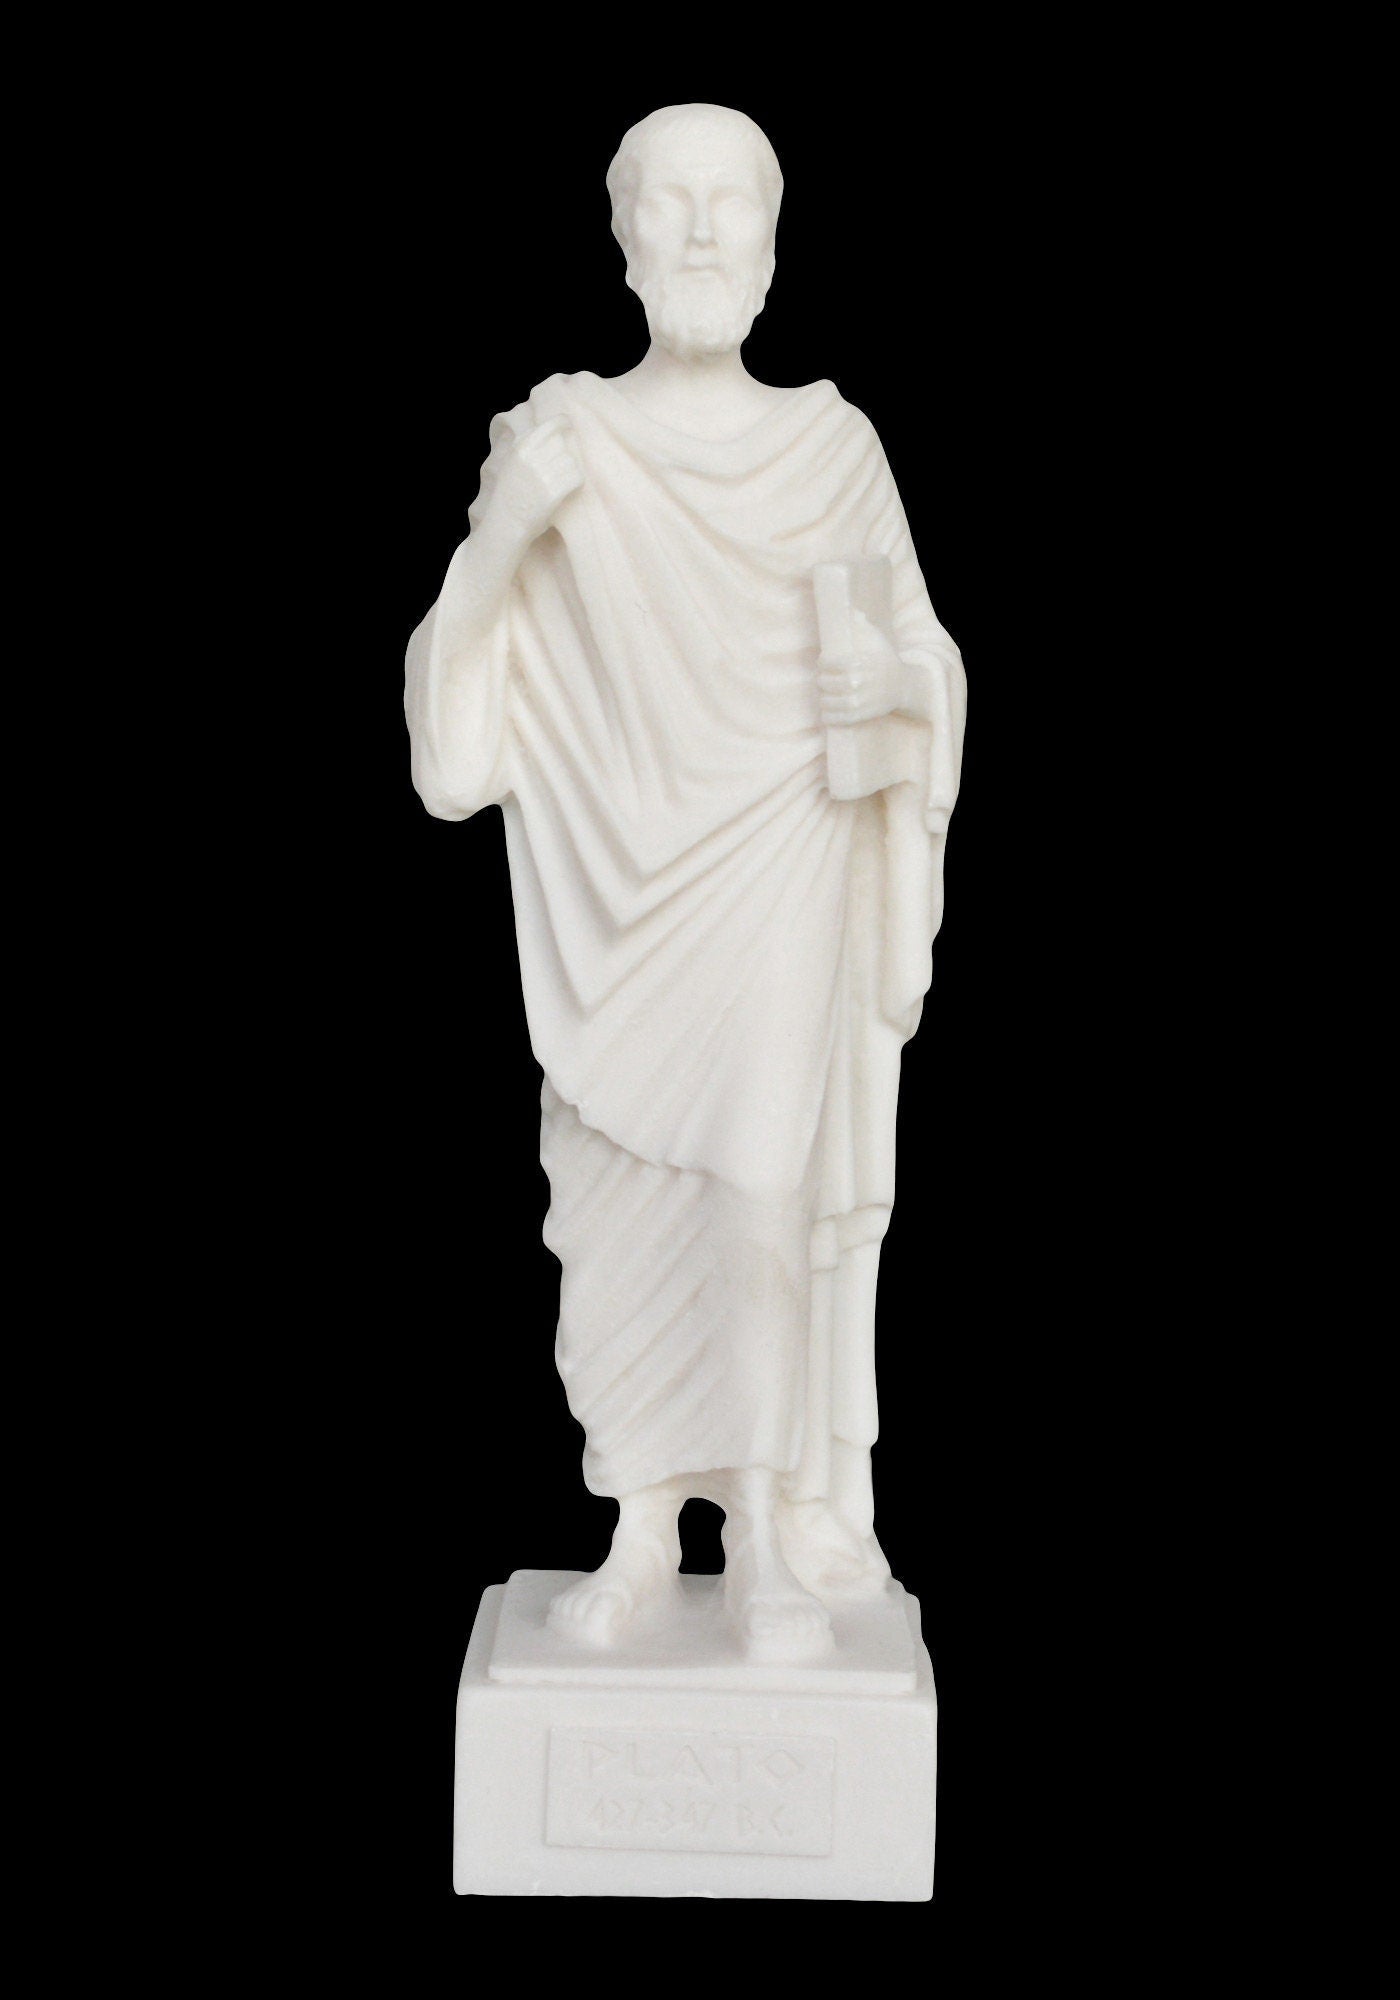 Plato - Ancient Greek Philosopher - 428-348 BC - Student of Socrates, Teacher of Aristotle - Founder of the Academy - Alabaster Statue